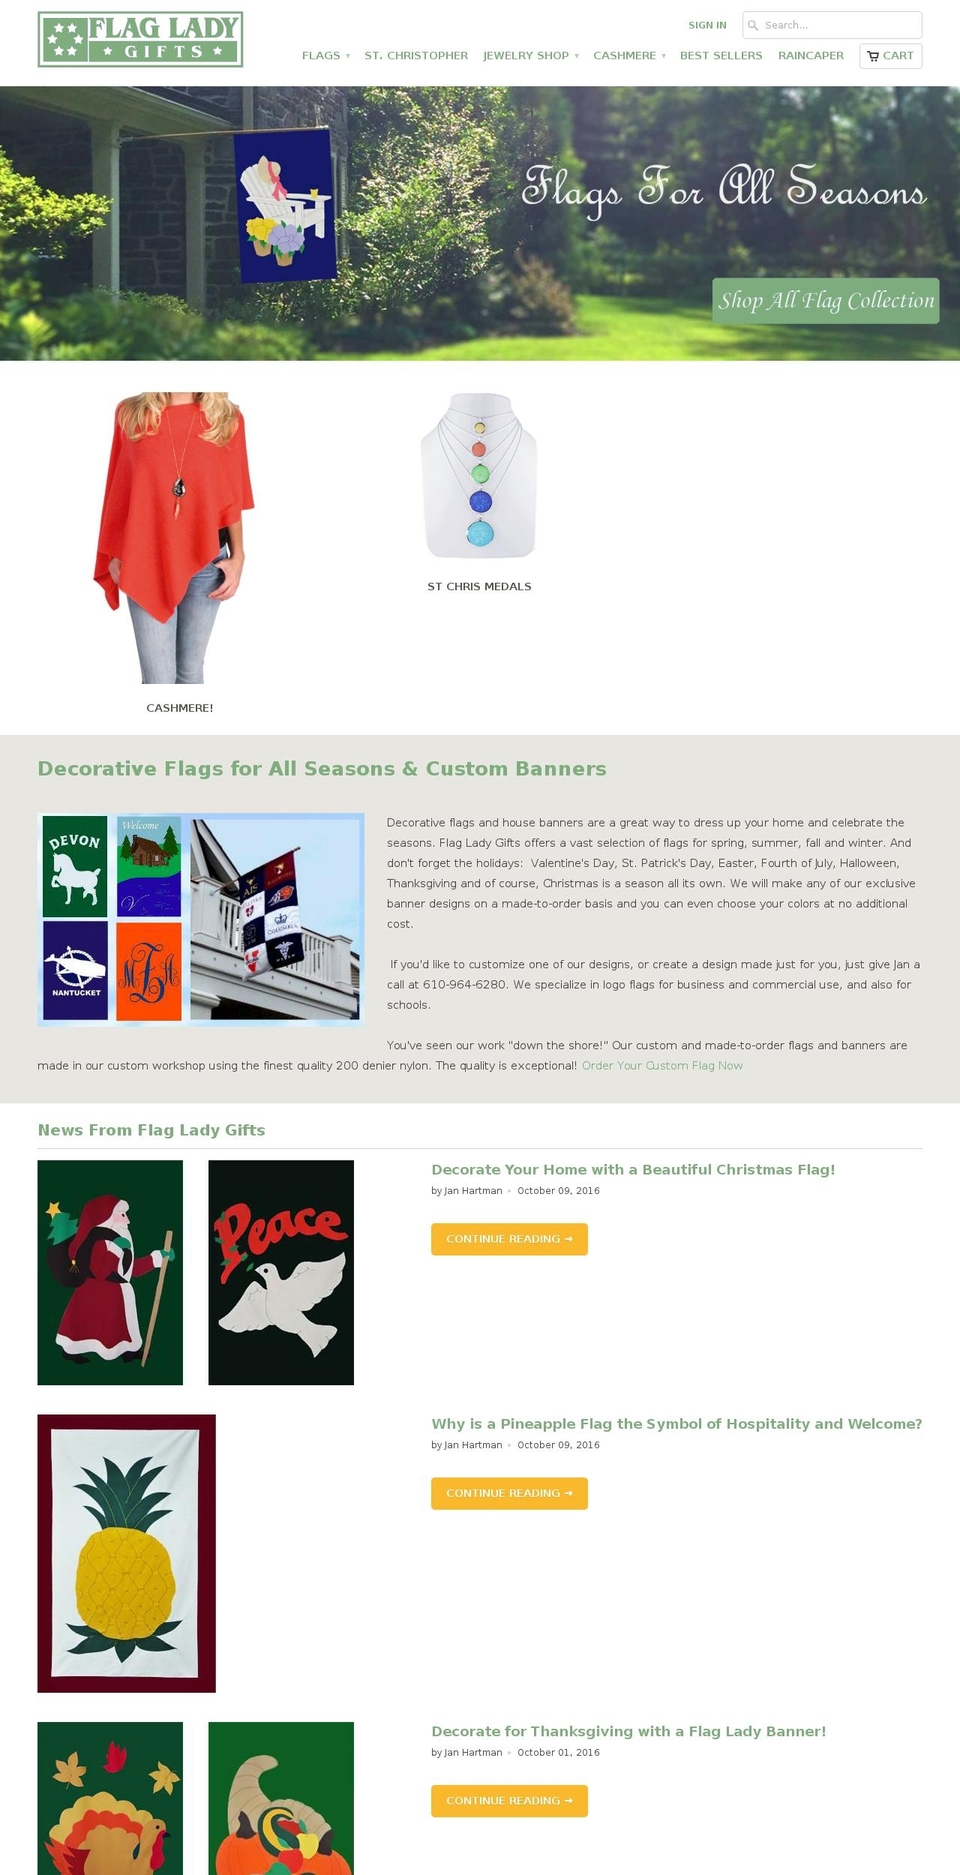 Gifts Shopify theme site example flagladygifts.com